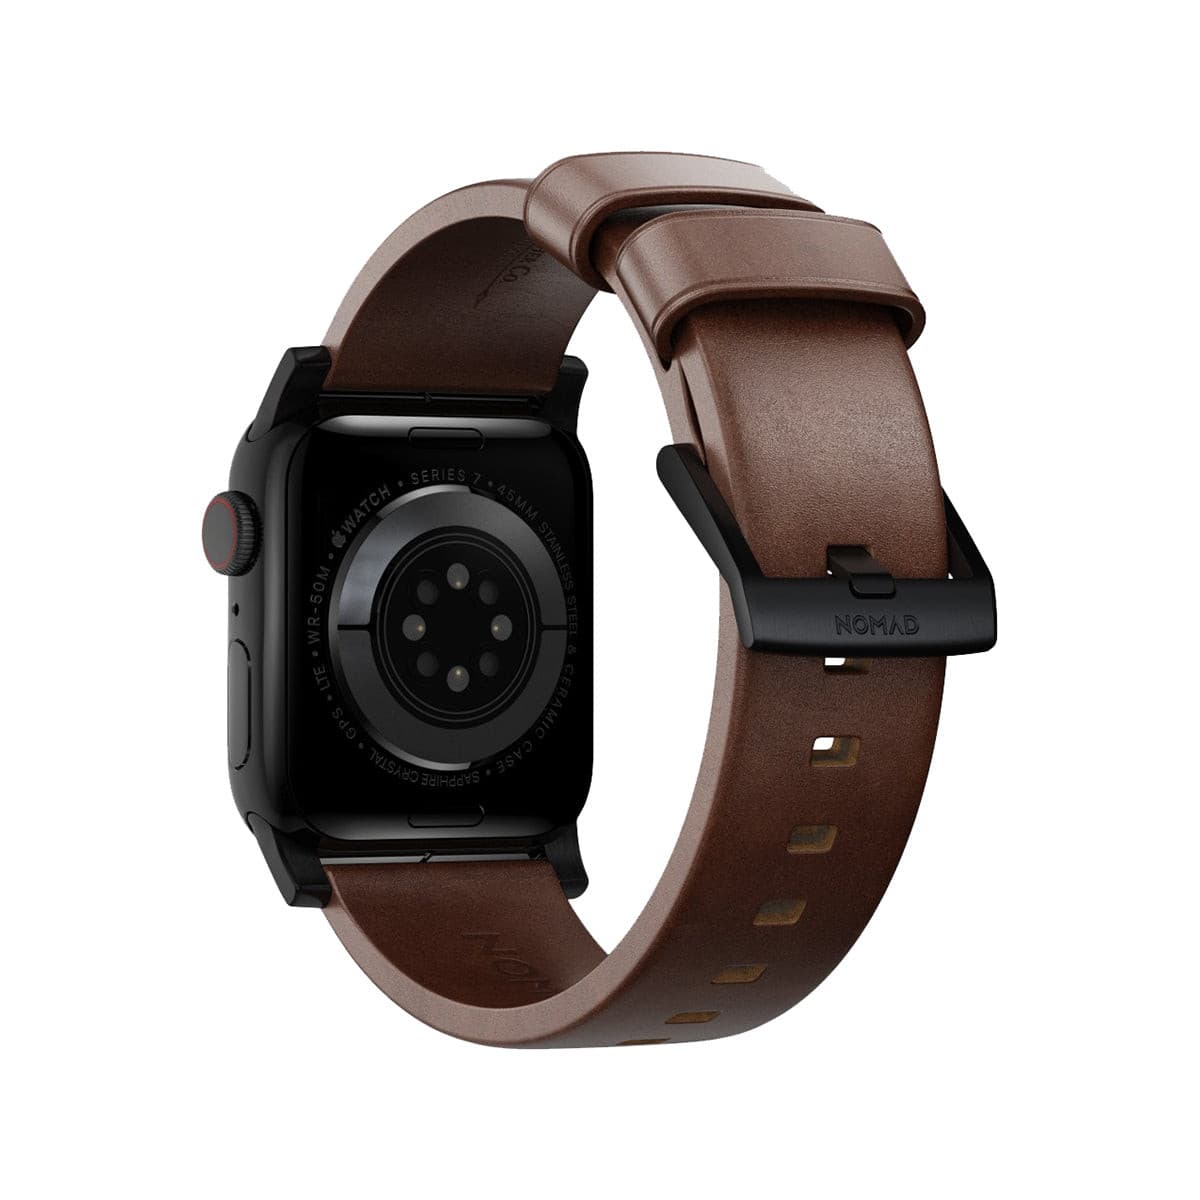 NOMAD Apple Watch Modern Band 45mm - Black Hardware with Rustic Brown Horween Leather Strap.